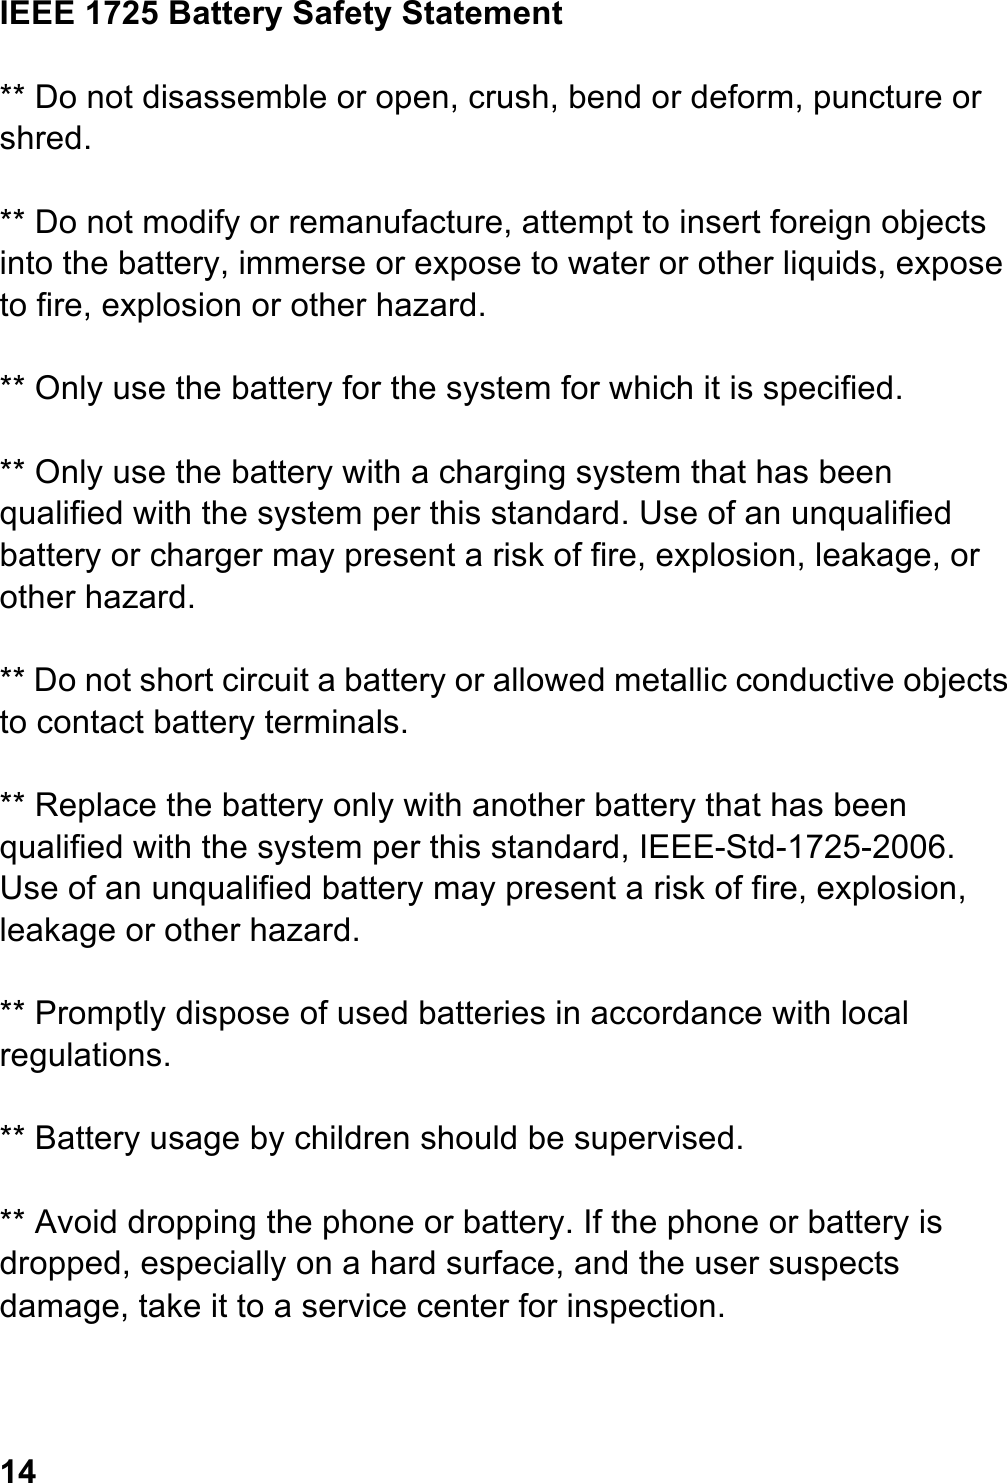 IEEE 1725 Battery Safety Statement  ** Do not disassemble or open, crush, bend or deform, puncture or shred.  ** Do not modify or remanufacture, attempt to insert foreign objects into the battery, immerse or expose to water or other liquids, expose to fire, explosion or other hazard.  ** Only use the battery for the system for which it is specified.  ** Only use the battery with a charging system that has been qualified with the system per this standard. Use of an unqualified battery or charger may present a risk of fire, explosion, leakage, or other hazard.  ** Do not short circuit a battery or allowed metallic conductive objects to contact battery terminals.  ** Replace the battery only with another battery that has been qualified with the system per this standard, IEEE-Std-1725-2006. Use of an unqualified battery may present a risk of fire, explosion, leakage or other hazard.  ** Promptly dispose of used batteries in accordance with local regulations.  ** Battery usage by children should be supervised.  ** Avoid dropping the phone or battery. If the phone or battery is dropped, especially on a hard surface, and the user suspects damage, take it to a service center for inspection.    14